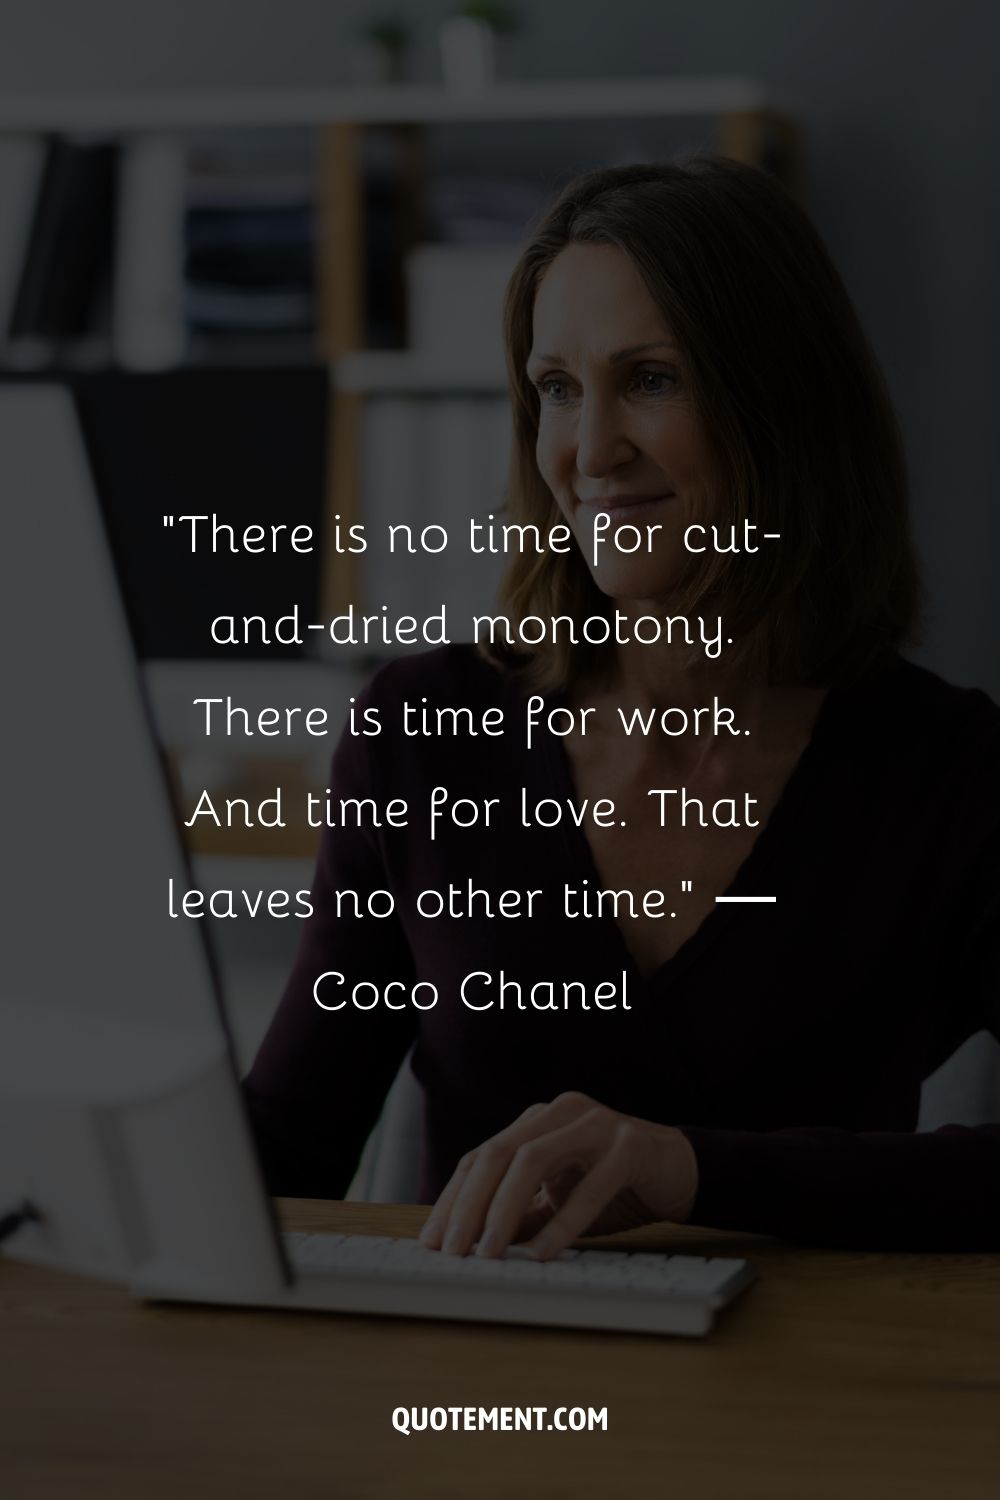 “There is no time for cut-and-dried monotony. There is time for work. And time for love. That leaves no other time.” ― Coco Chanel